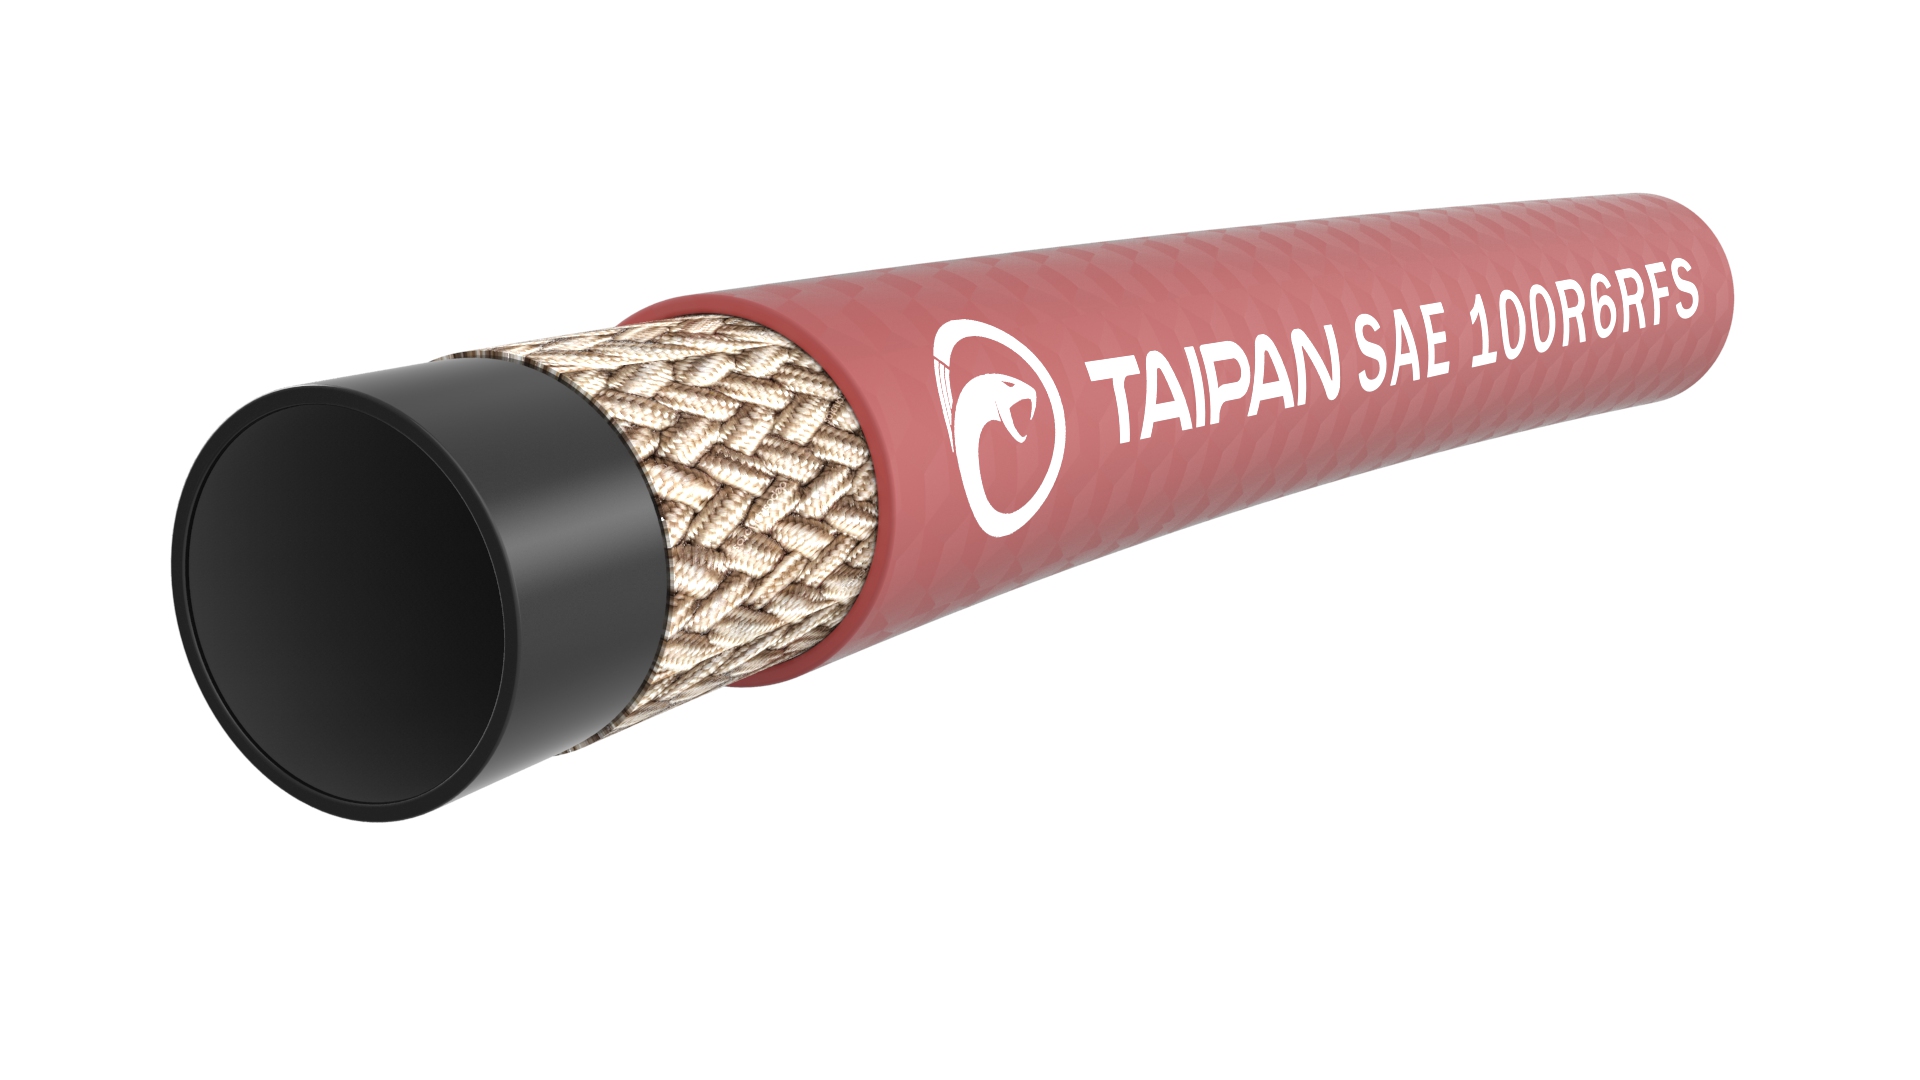 SAE100R6 Red Fire Suppression Hose